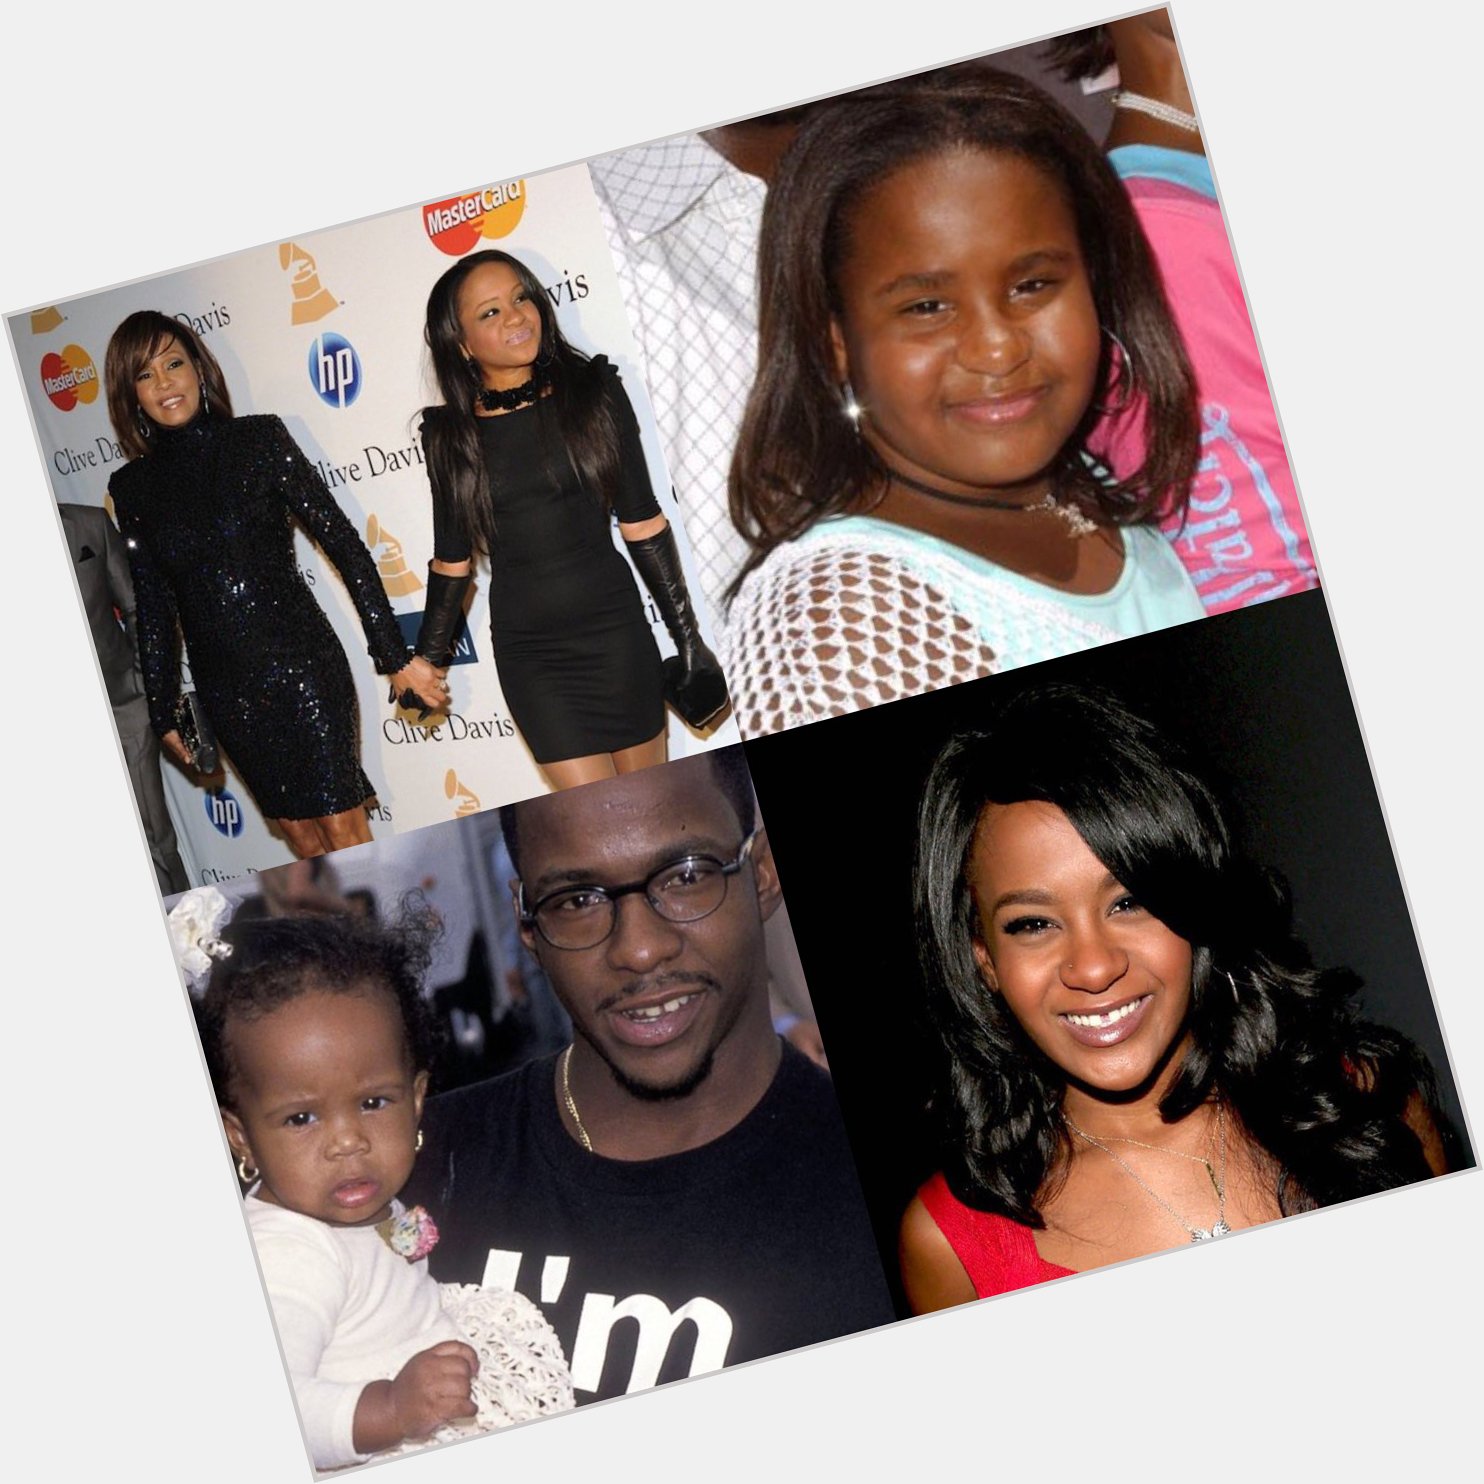 Happy 25 birthday to Bobbi Kristina Brown up in heaven.may she Rest In Peace.  